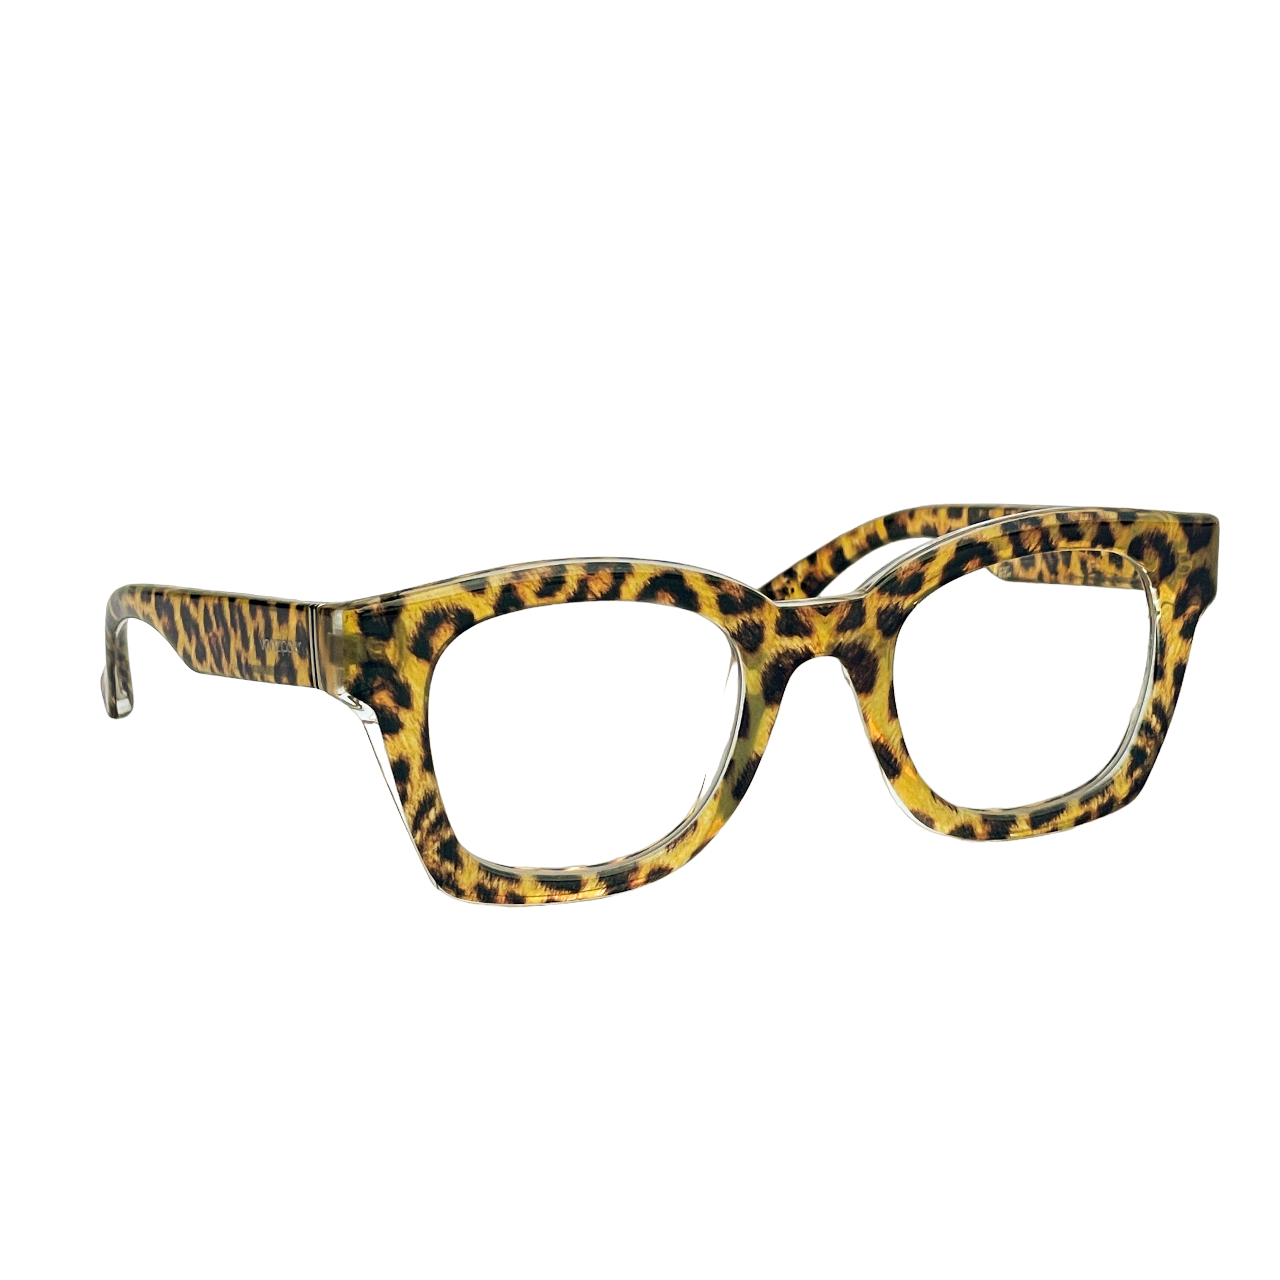 CLEAR LEOPARD GLASSES